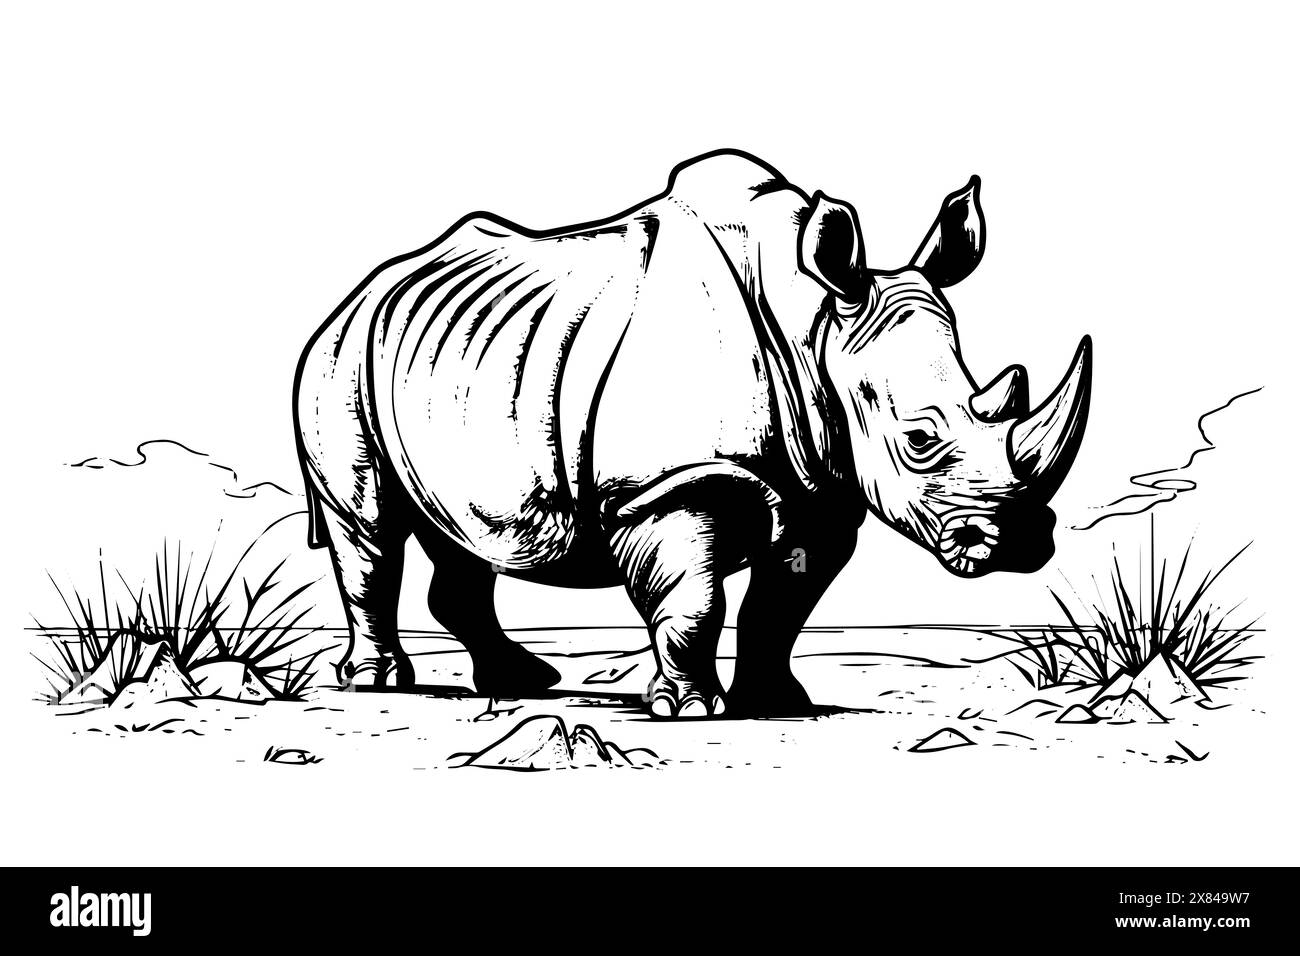 Rhinoceros in desert. Engraved lined style with bold lines. Black and white colors. Stock Vector